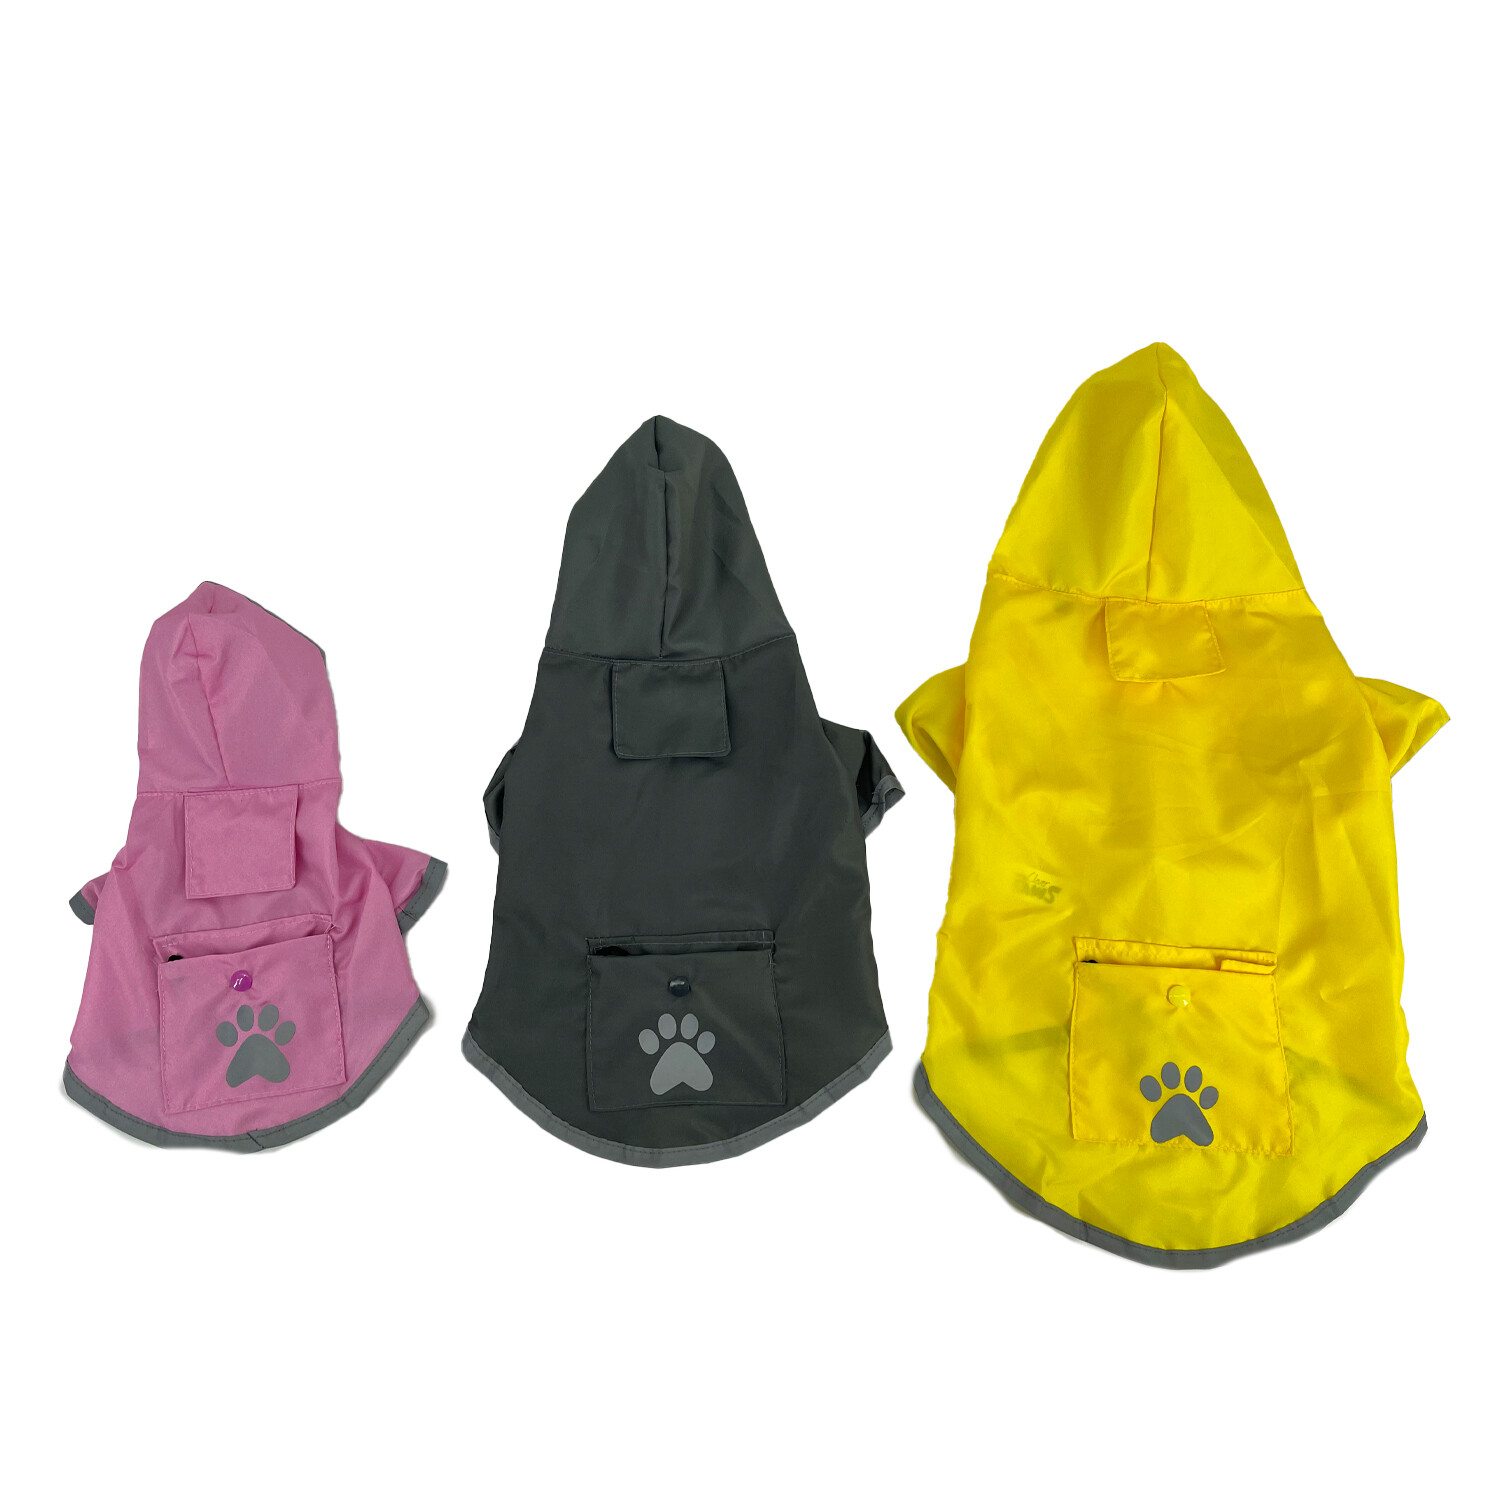 Single Clever Paws Pet Packaway Raincoat 40cm in Assorted styles Image